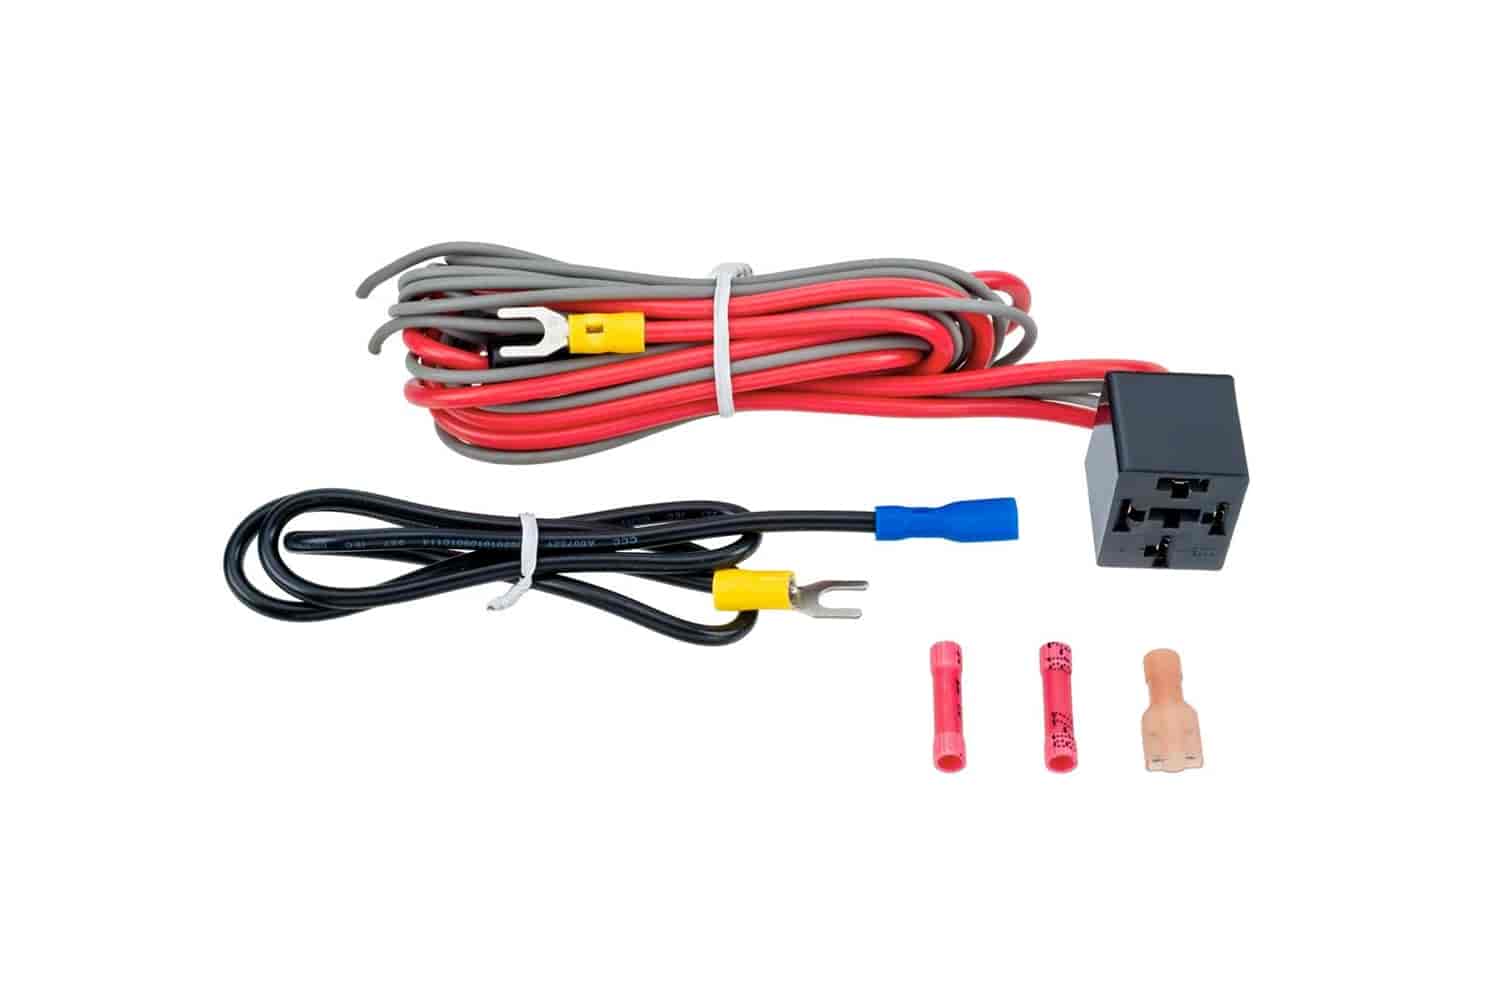 MOTORCYCLE HORN WIRING KIT- Complete Plug-N-Play Wiring Kit for Wolo Bad Boy an all Direct Drive Air